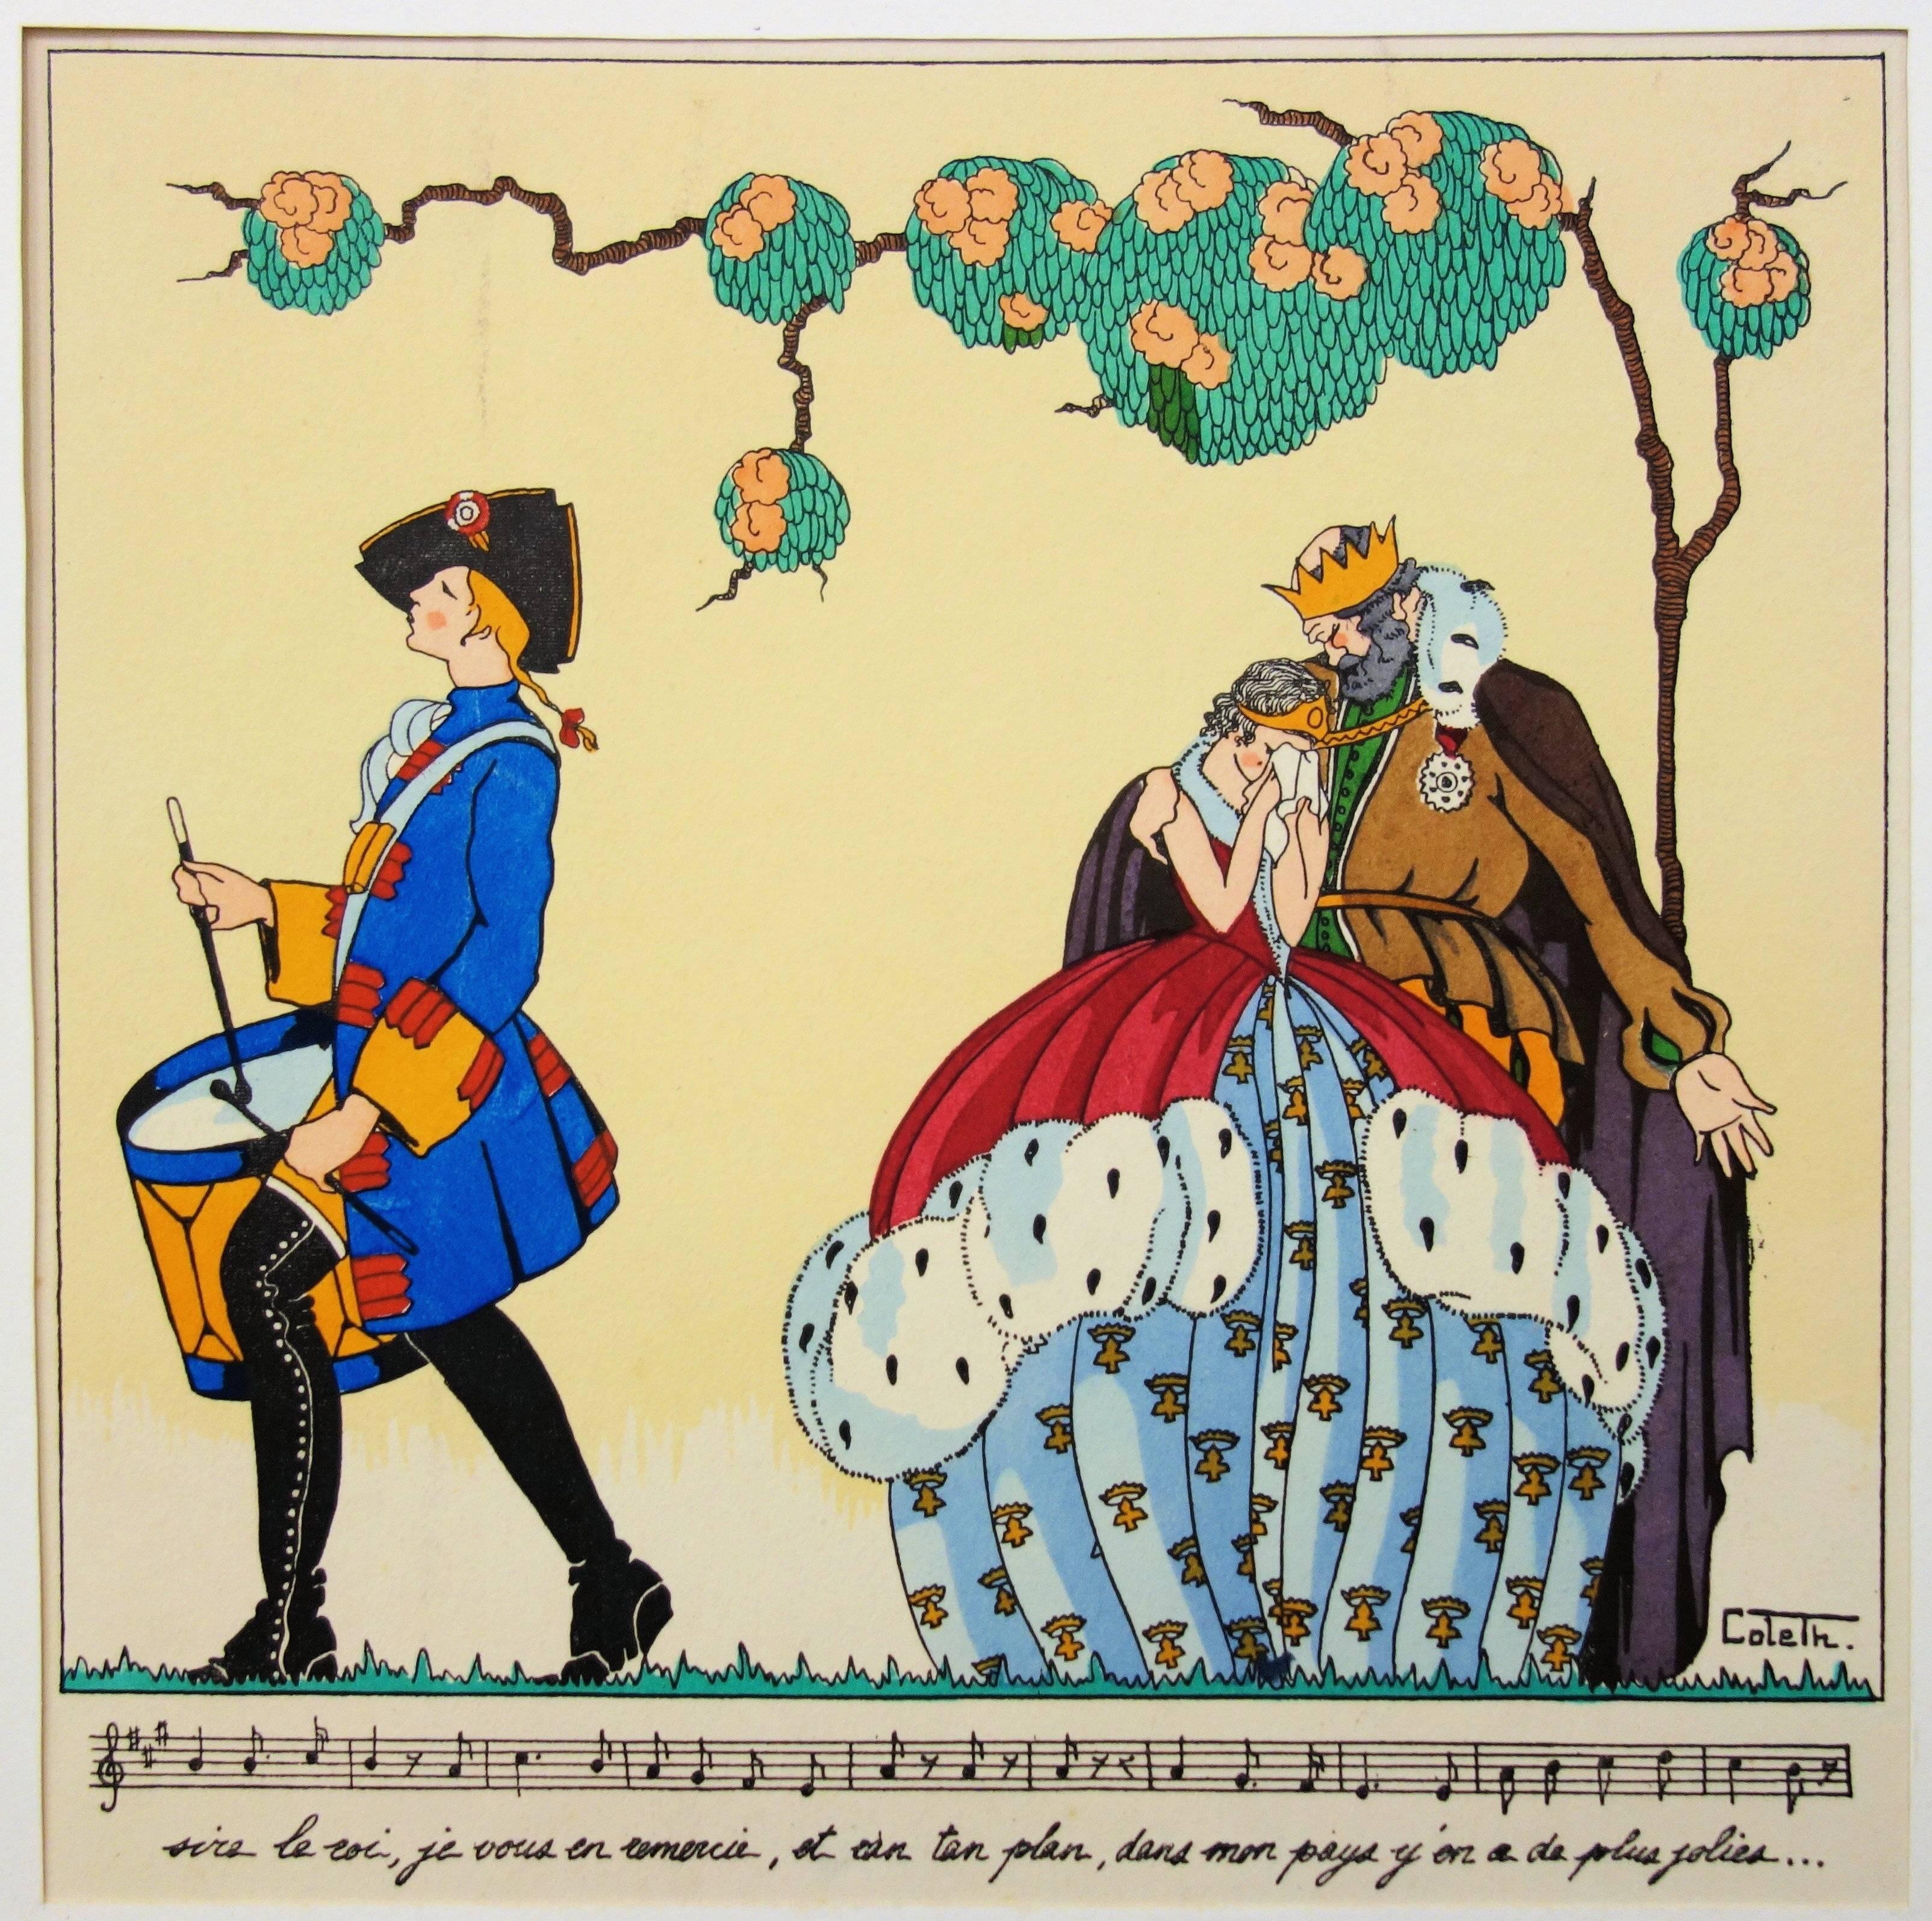 Coleth : King, Queen and Musician - Original pochoir - Print by Unknown